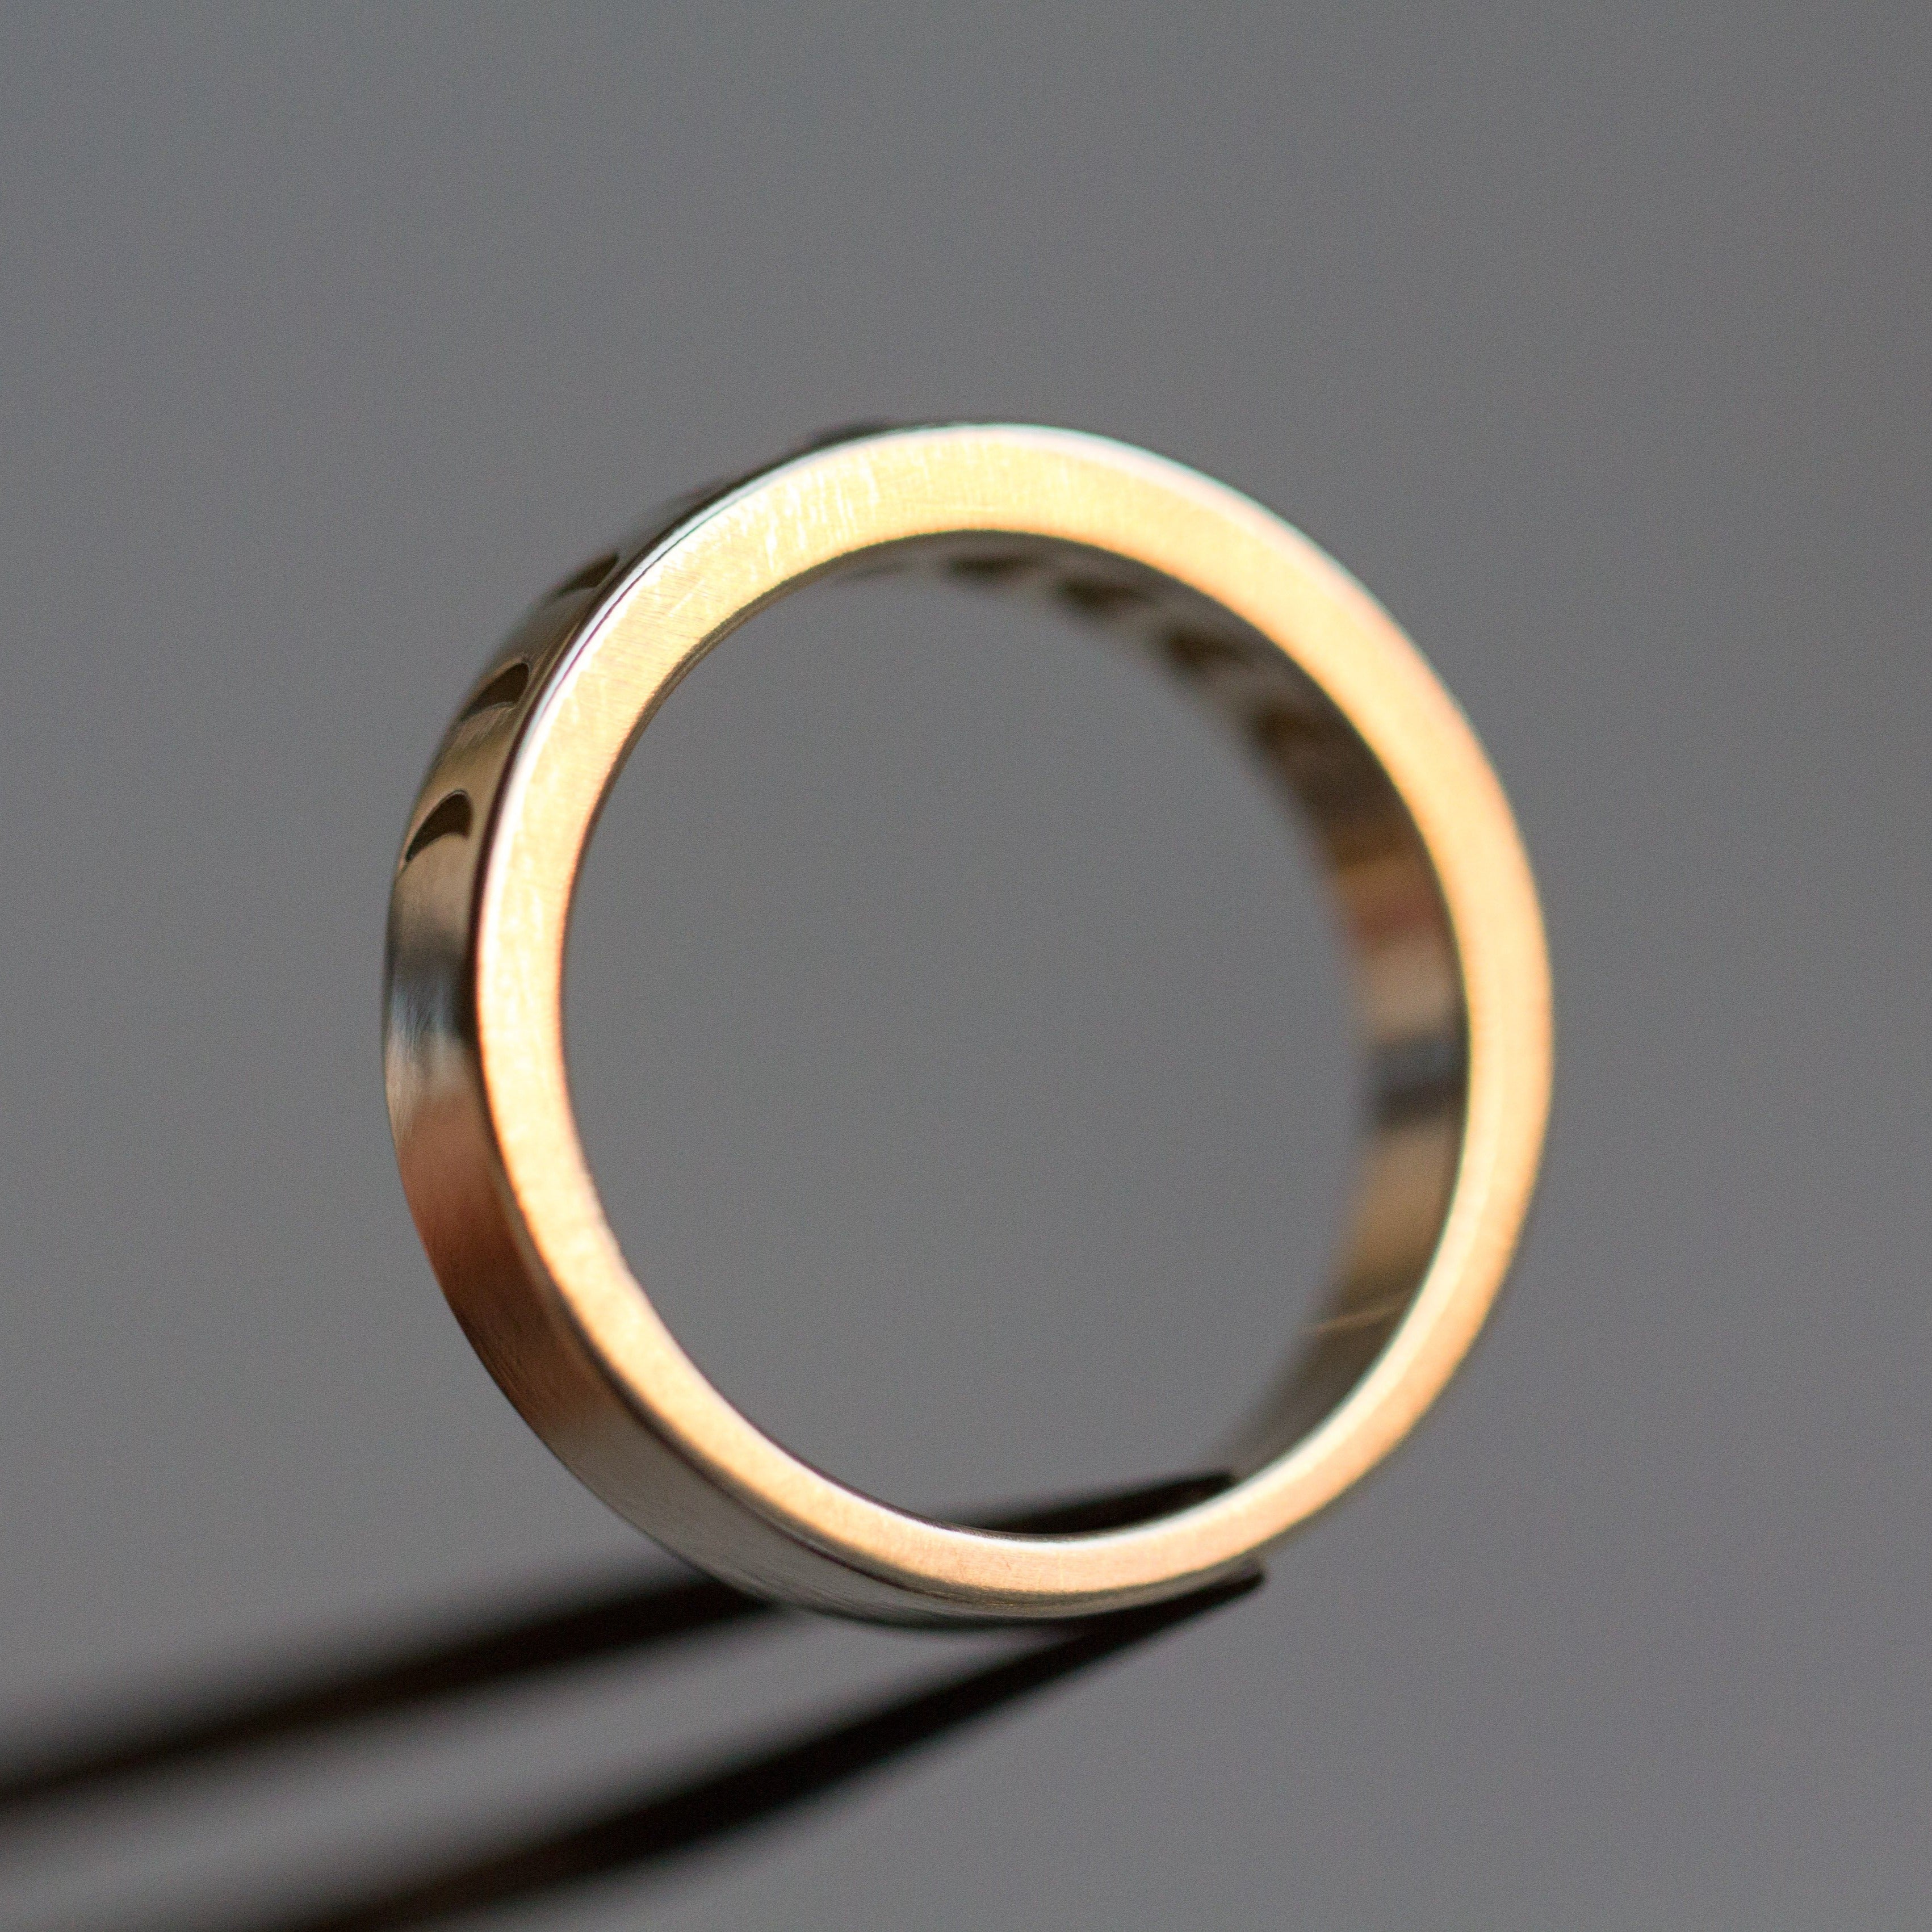 Moon Phase Rings moon phase rings > stacking rings > wedding bands > gender neutral bands > rose cut diamond ring > promise rings >lunar phase ring > moon ring > phases of the moon ring Moon Phase Ring | 4mm wide | gemstones